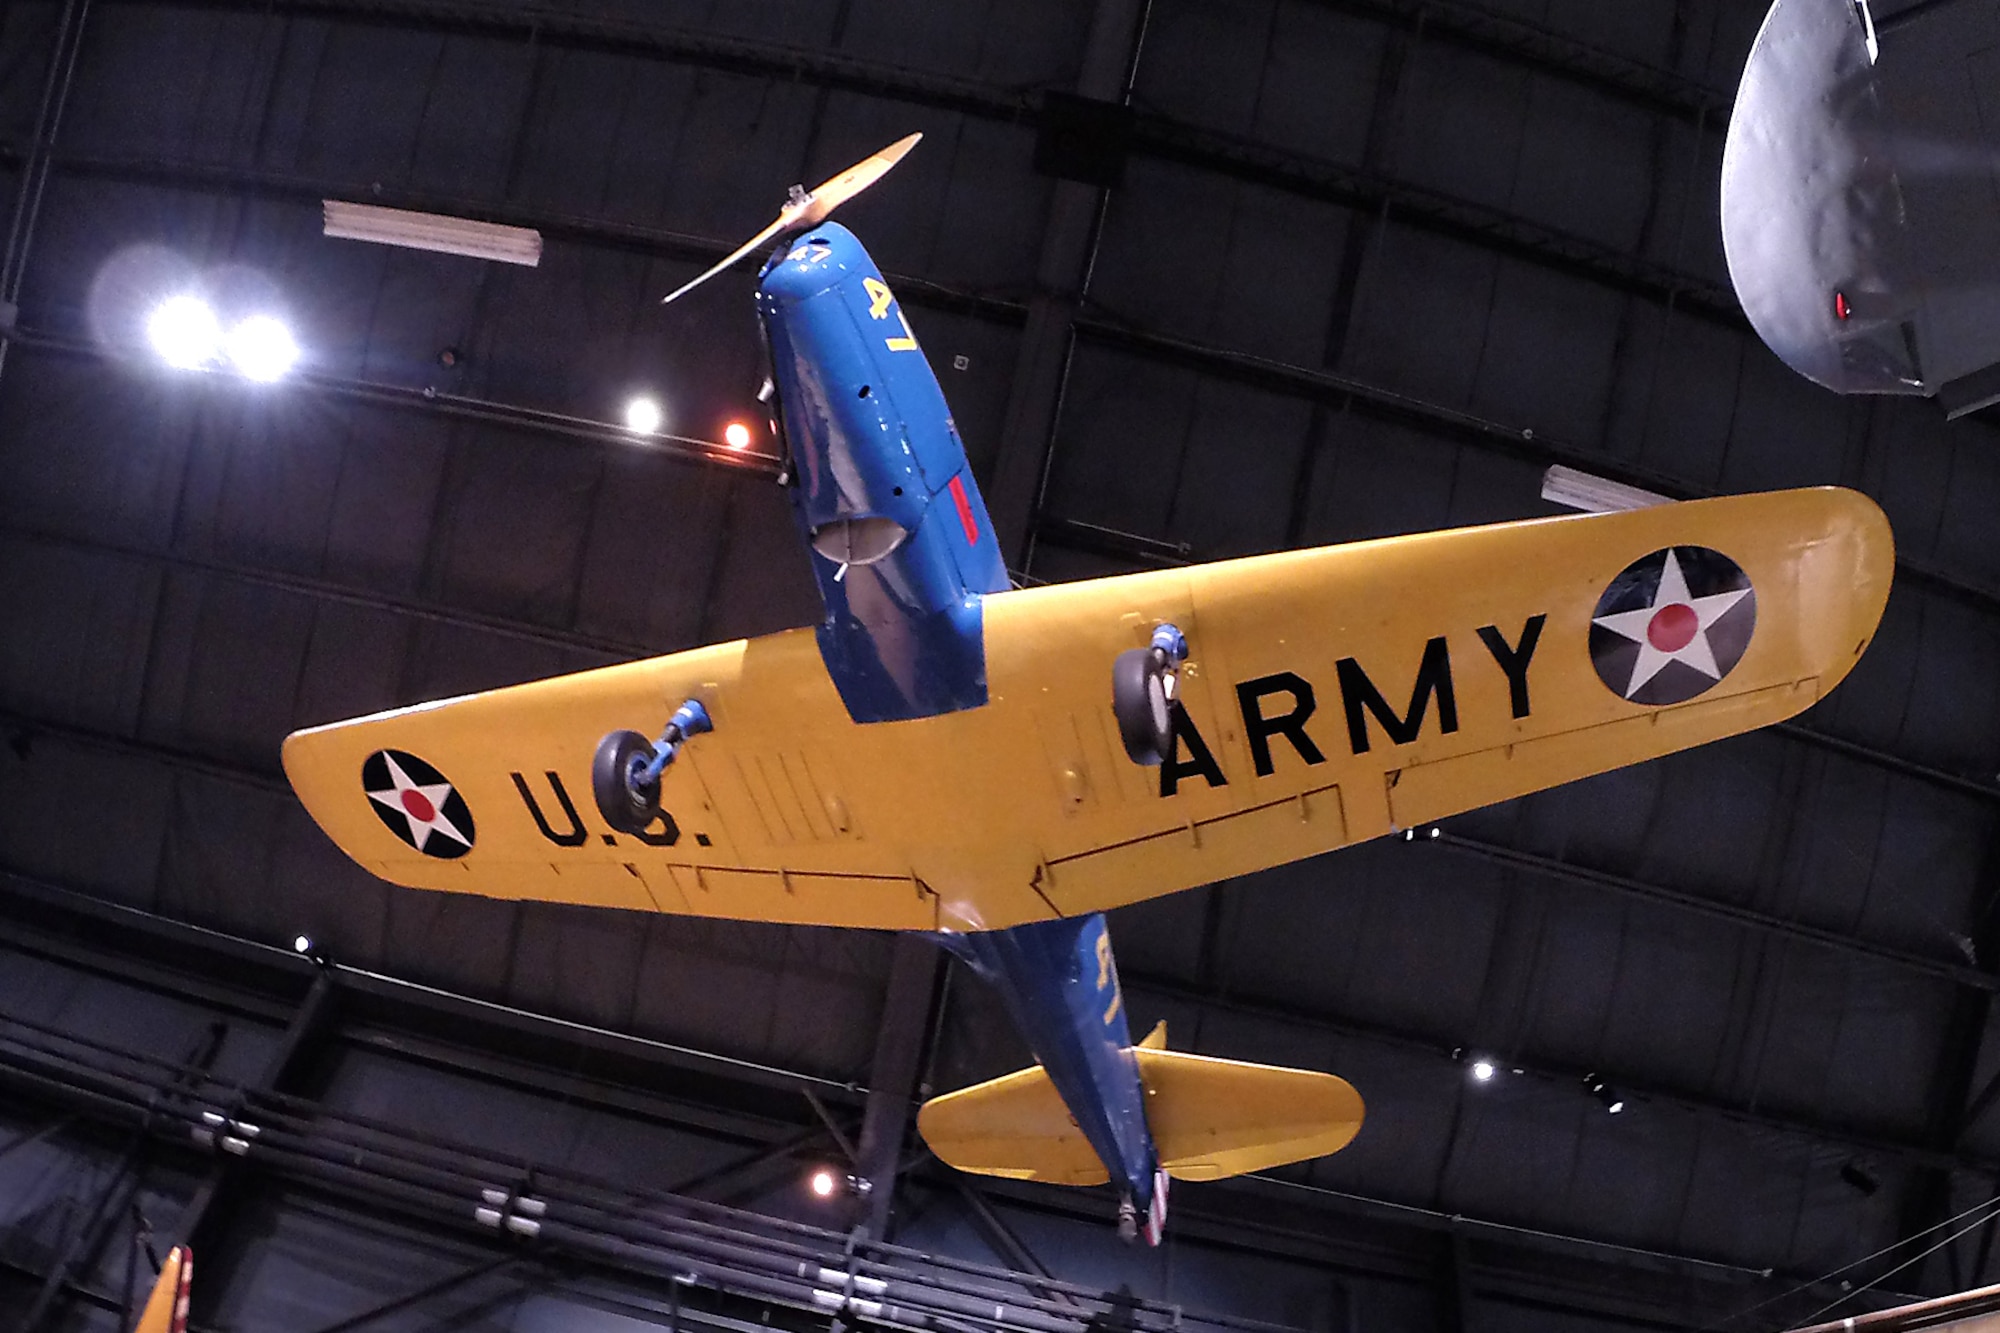 Fairchild PT-19A Cornell in the Early Years Gallery at the National Museum of the United States Air Force. (U.S. Air Force photo)
